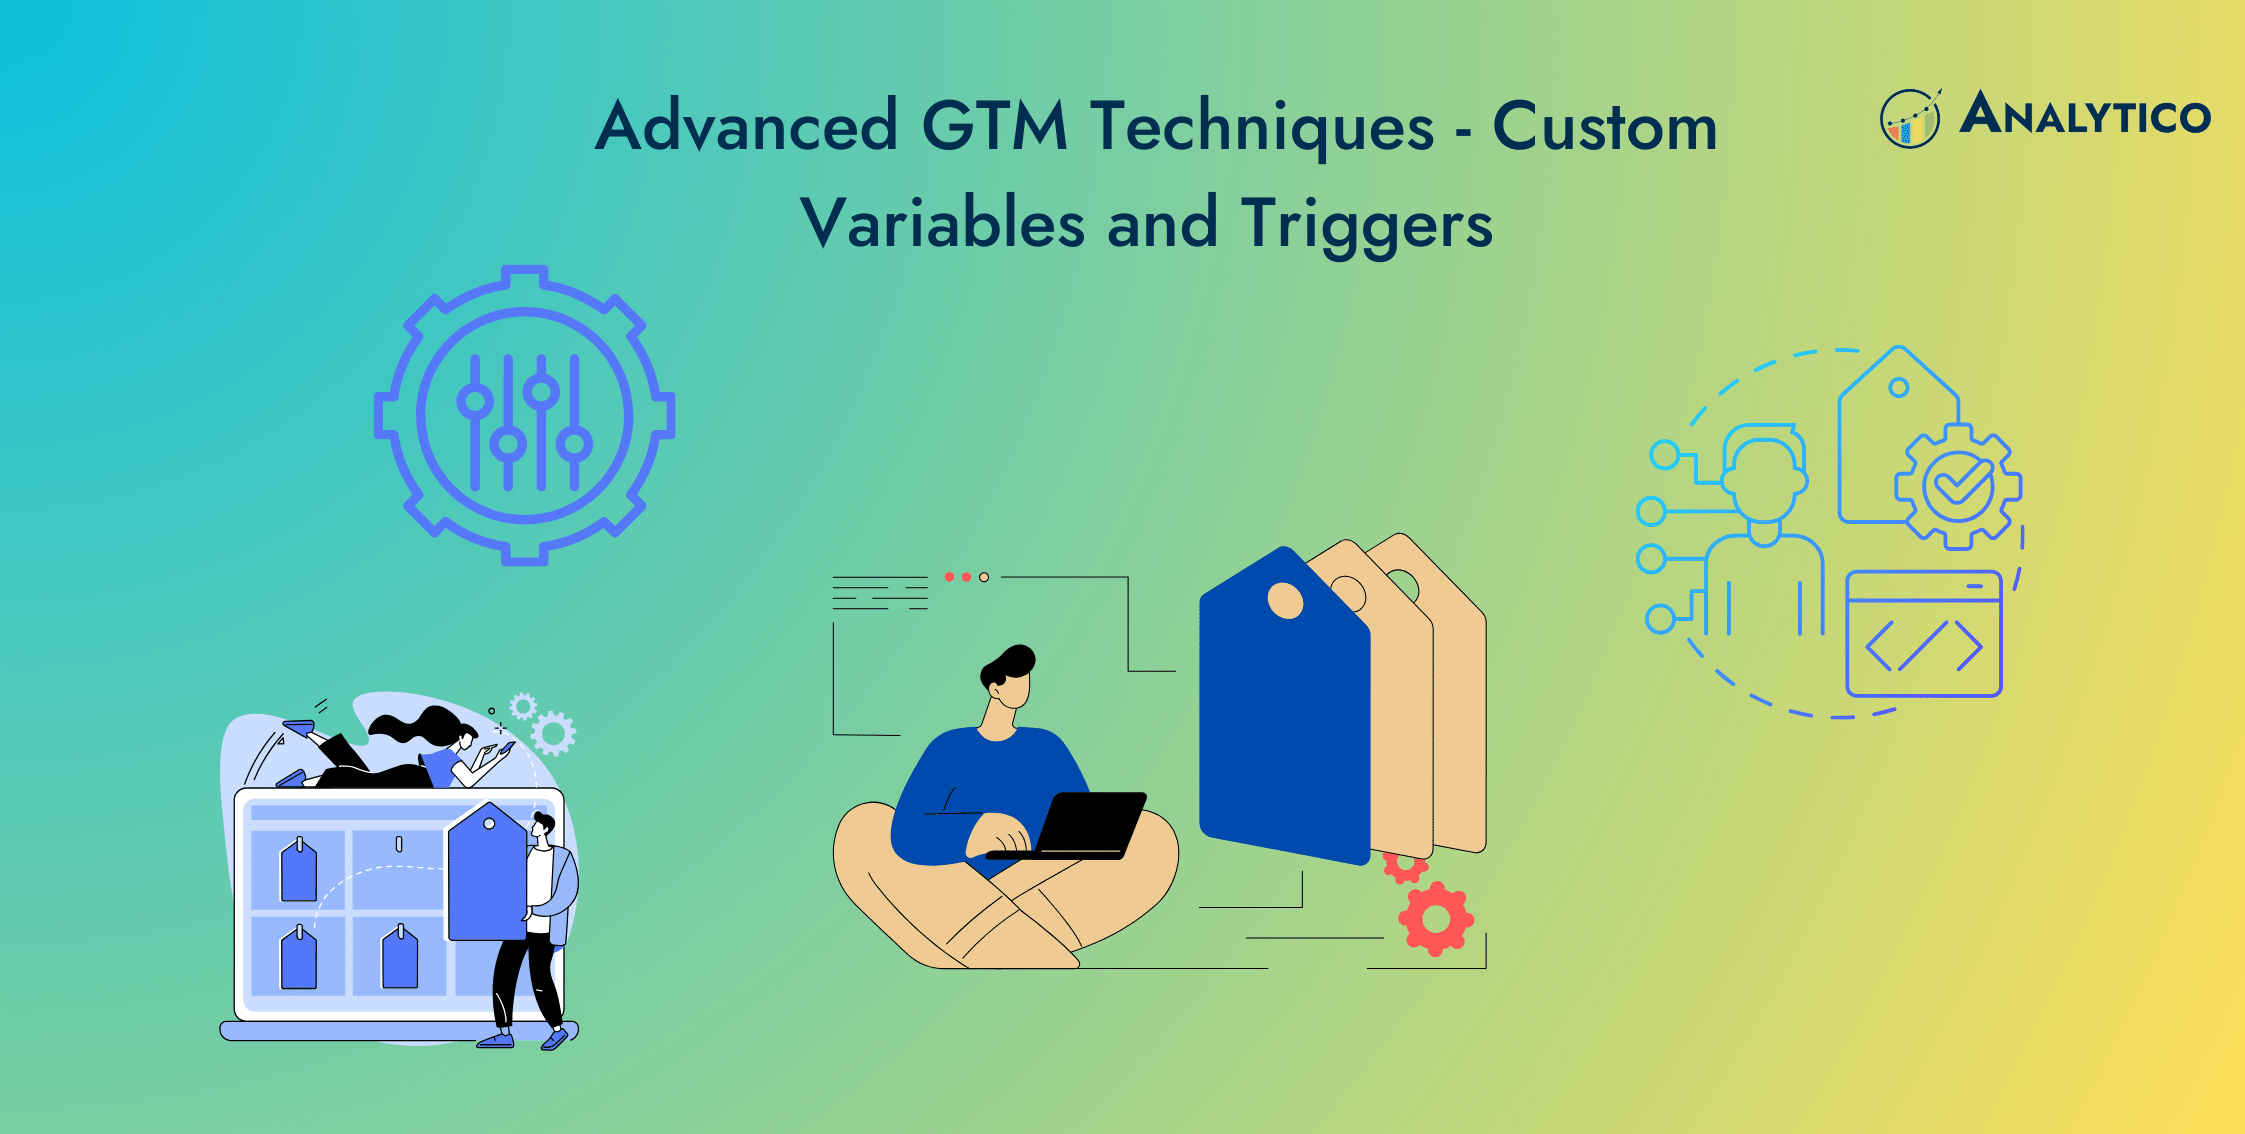 Advanced GTM Techniques - Custom Variables and Triggers for Insights